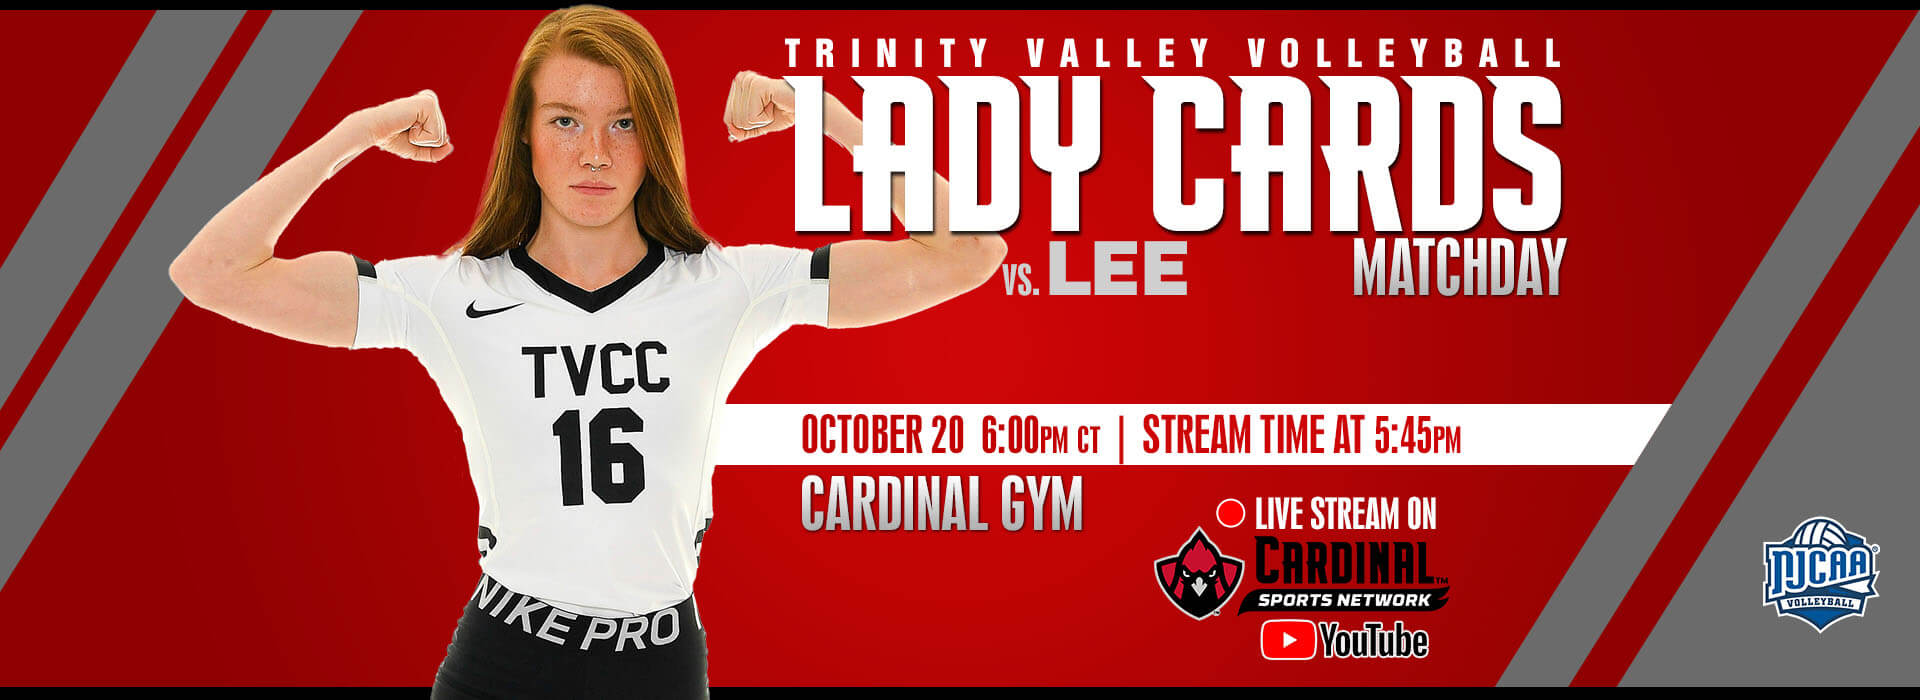 Lady Cards vs. Lee - Matchday October 20, 6:00pm. Stream time at 5:45pm.